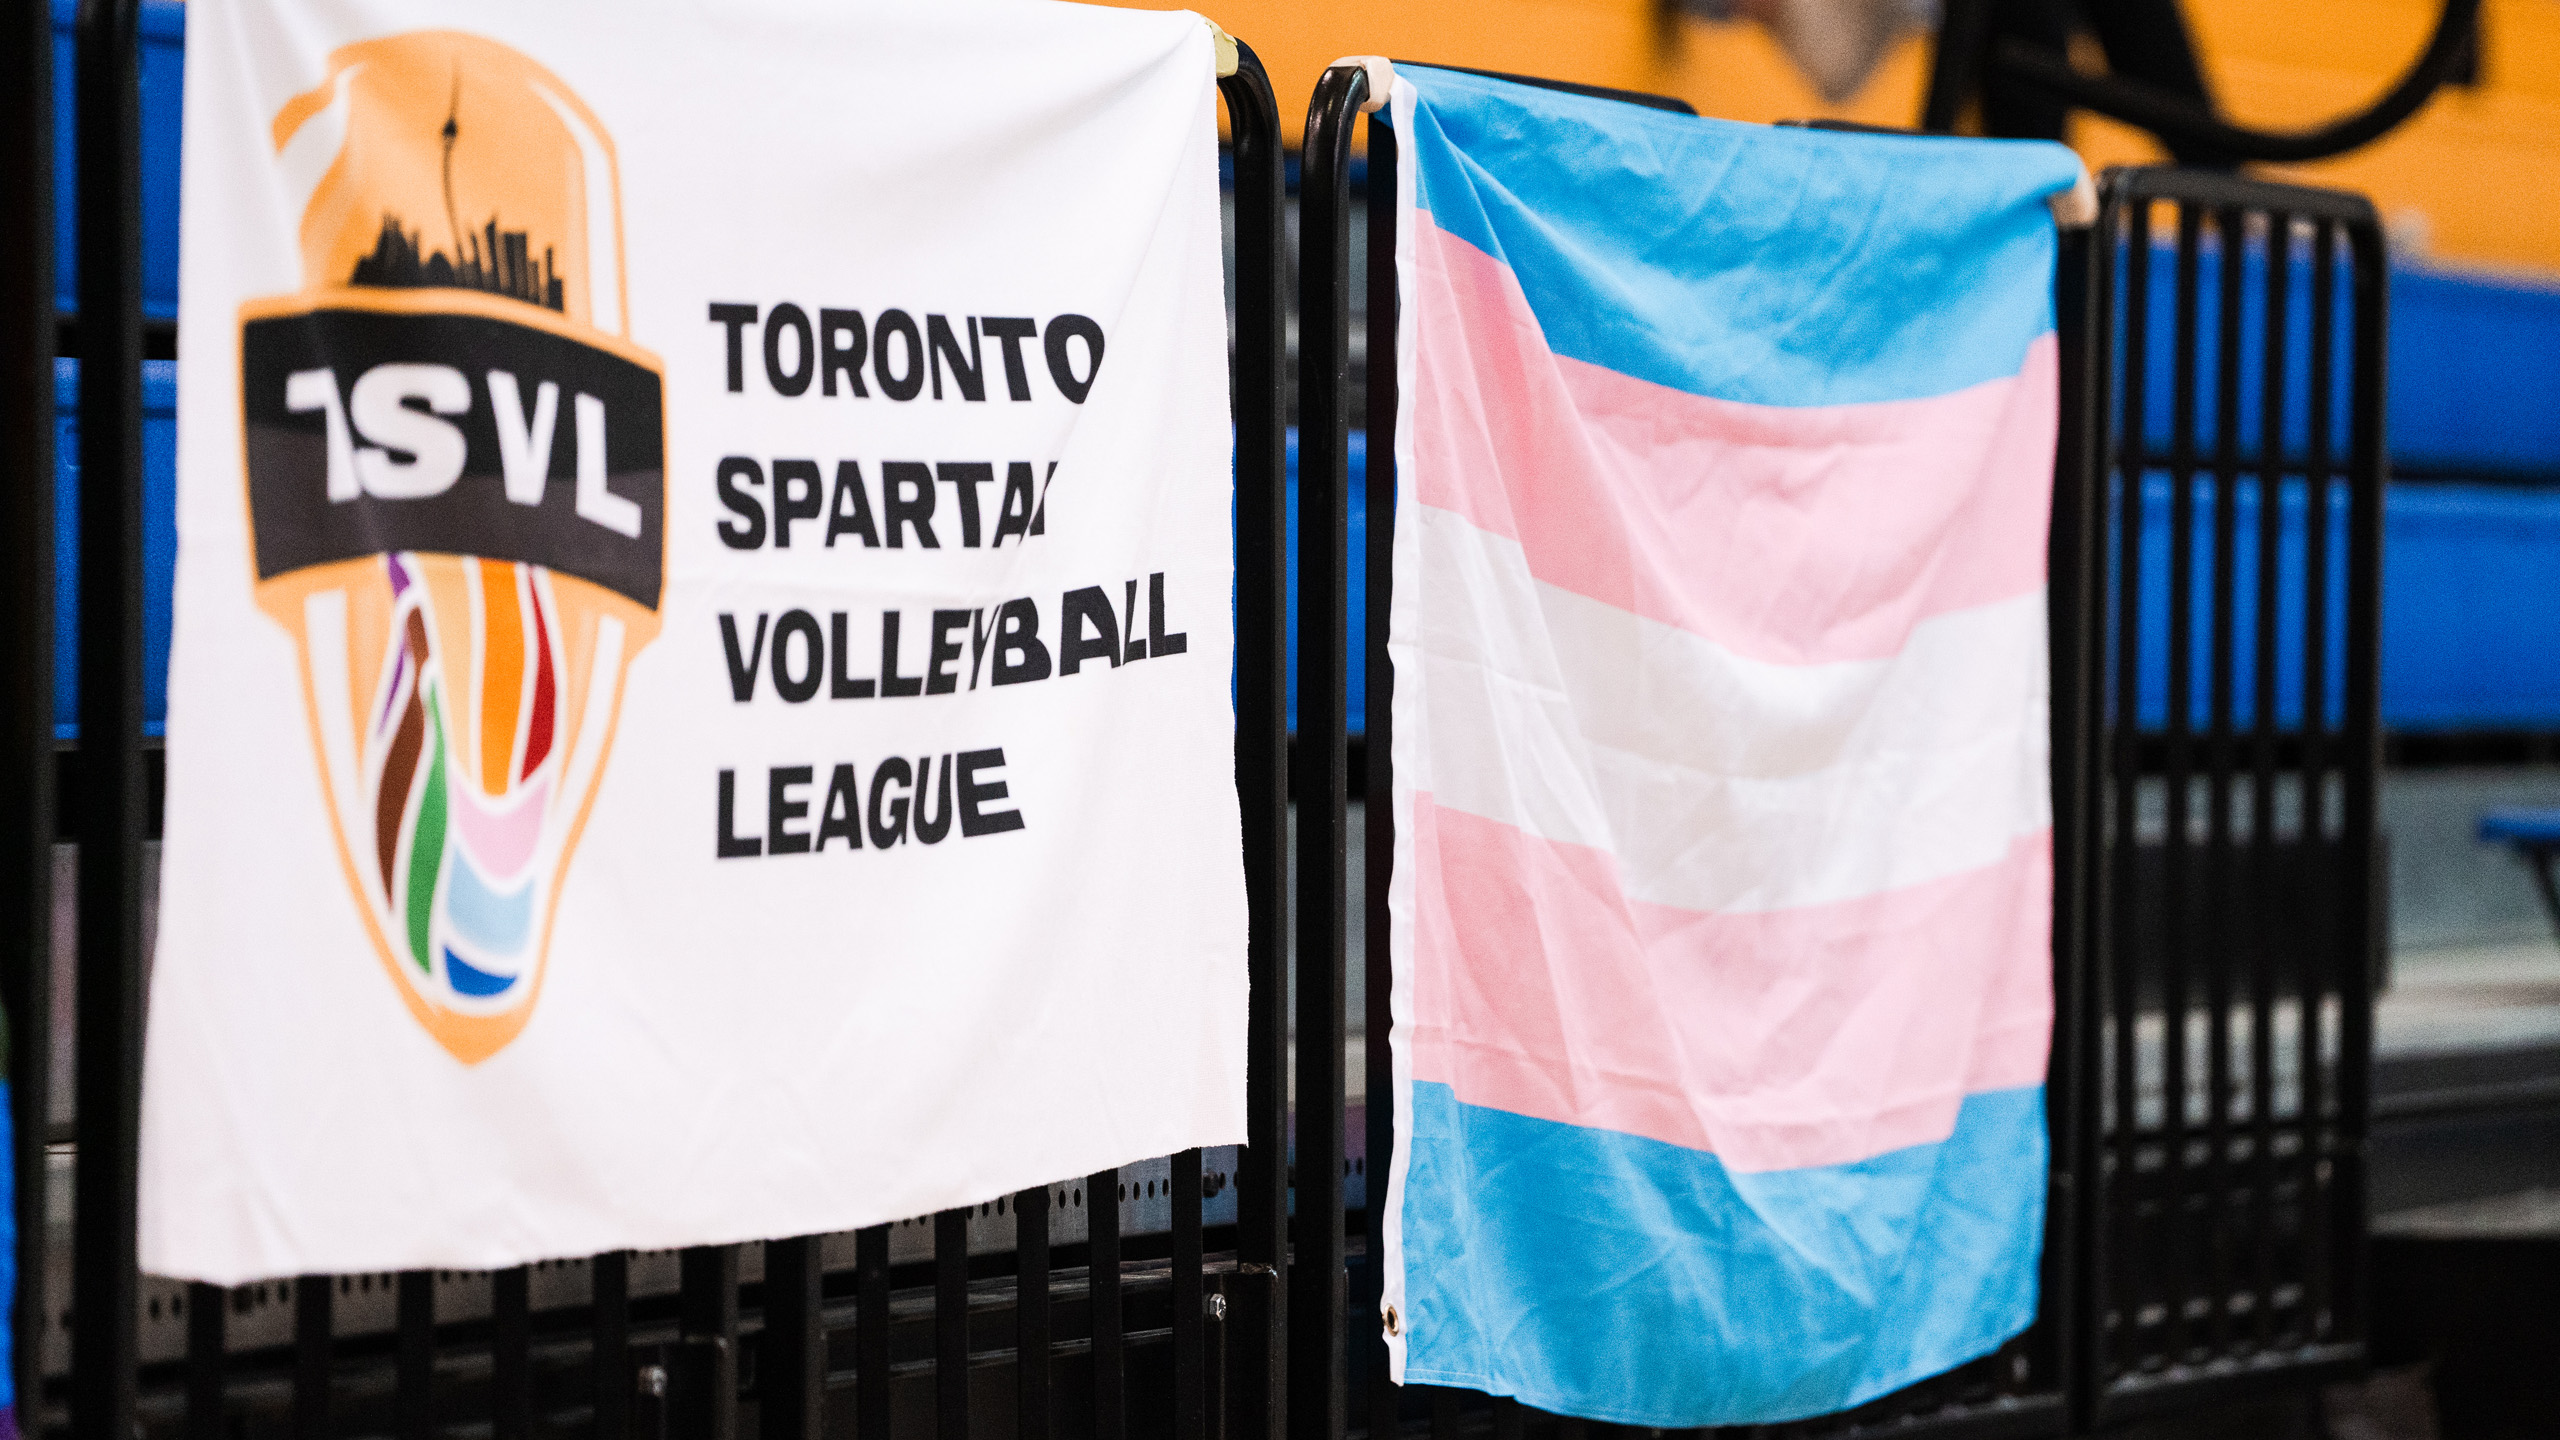 The Transgender flag hung up on the bleachers next to a flag from the Toronto Spartan Volleyball League